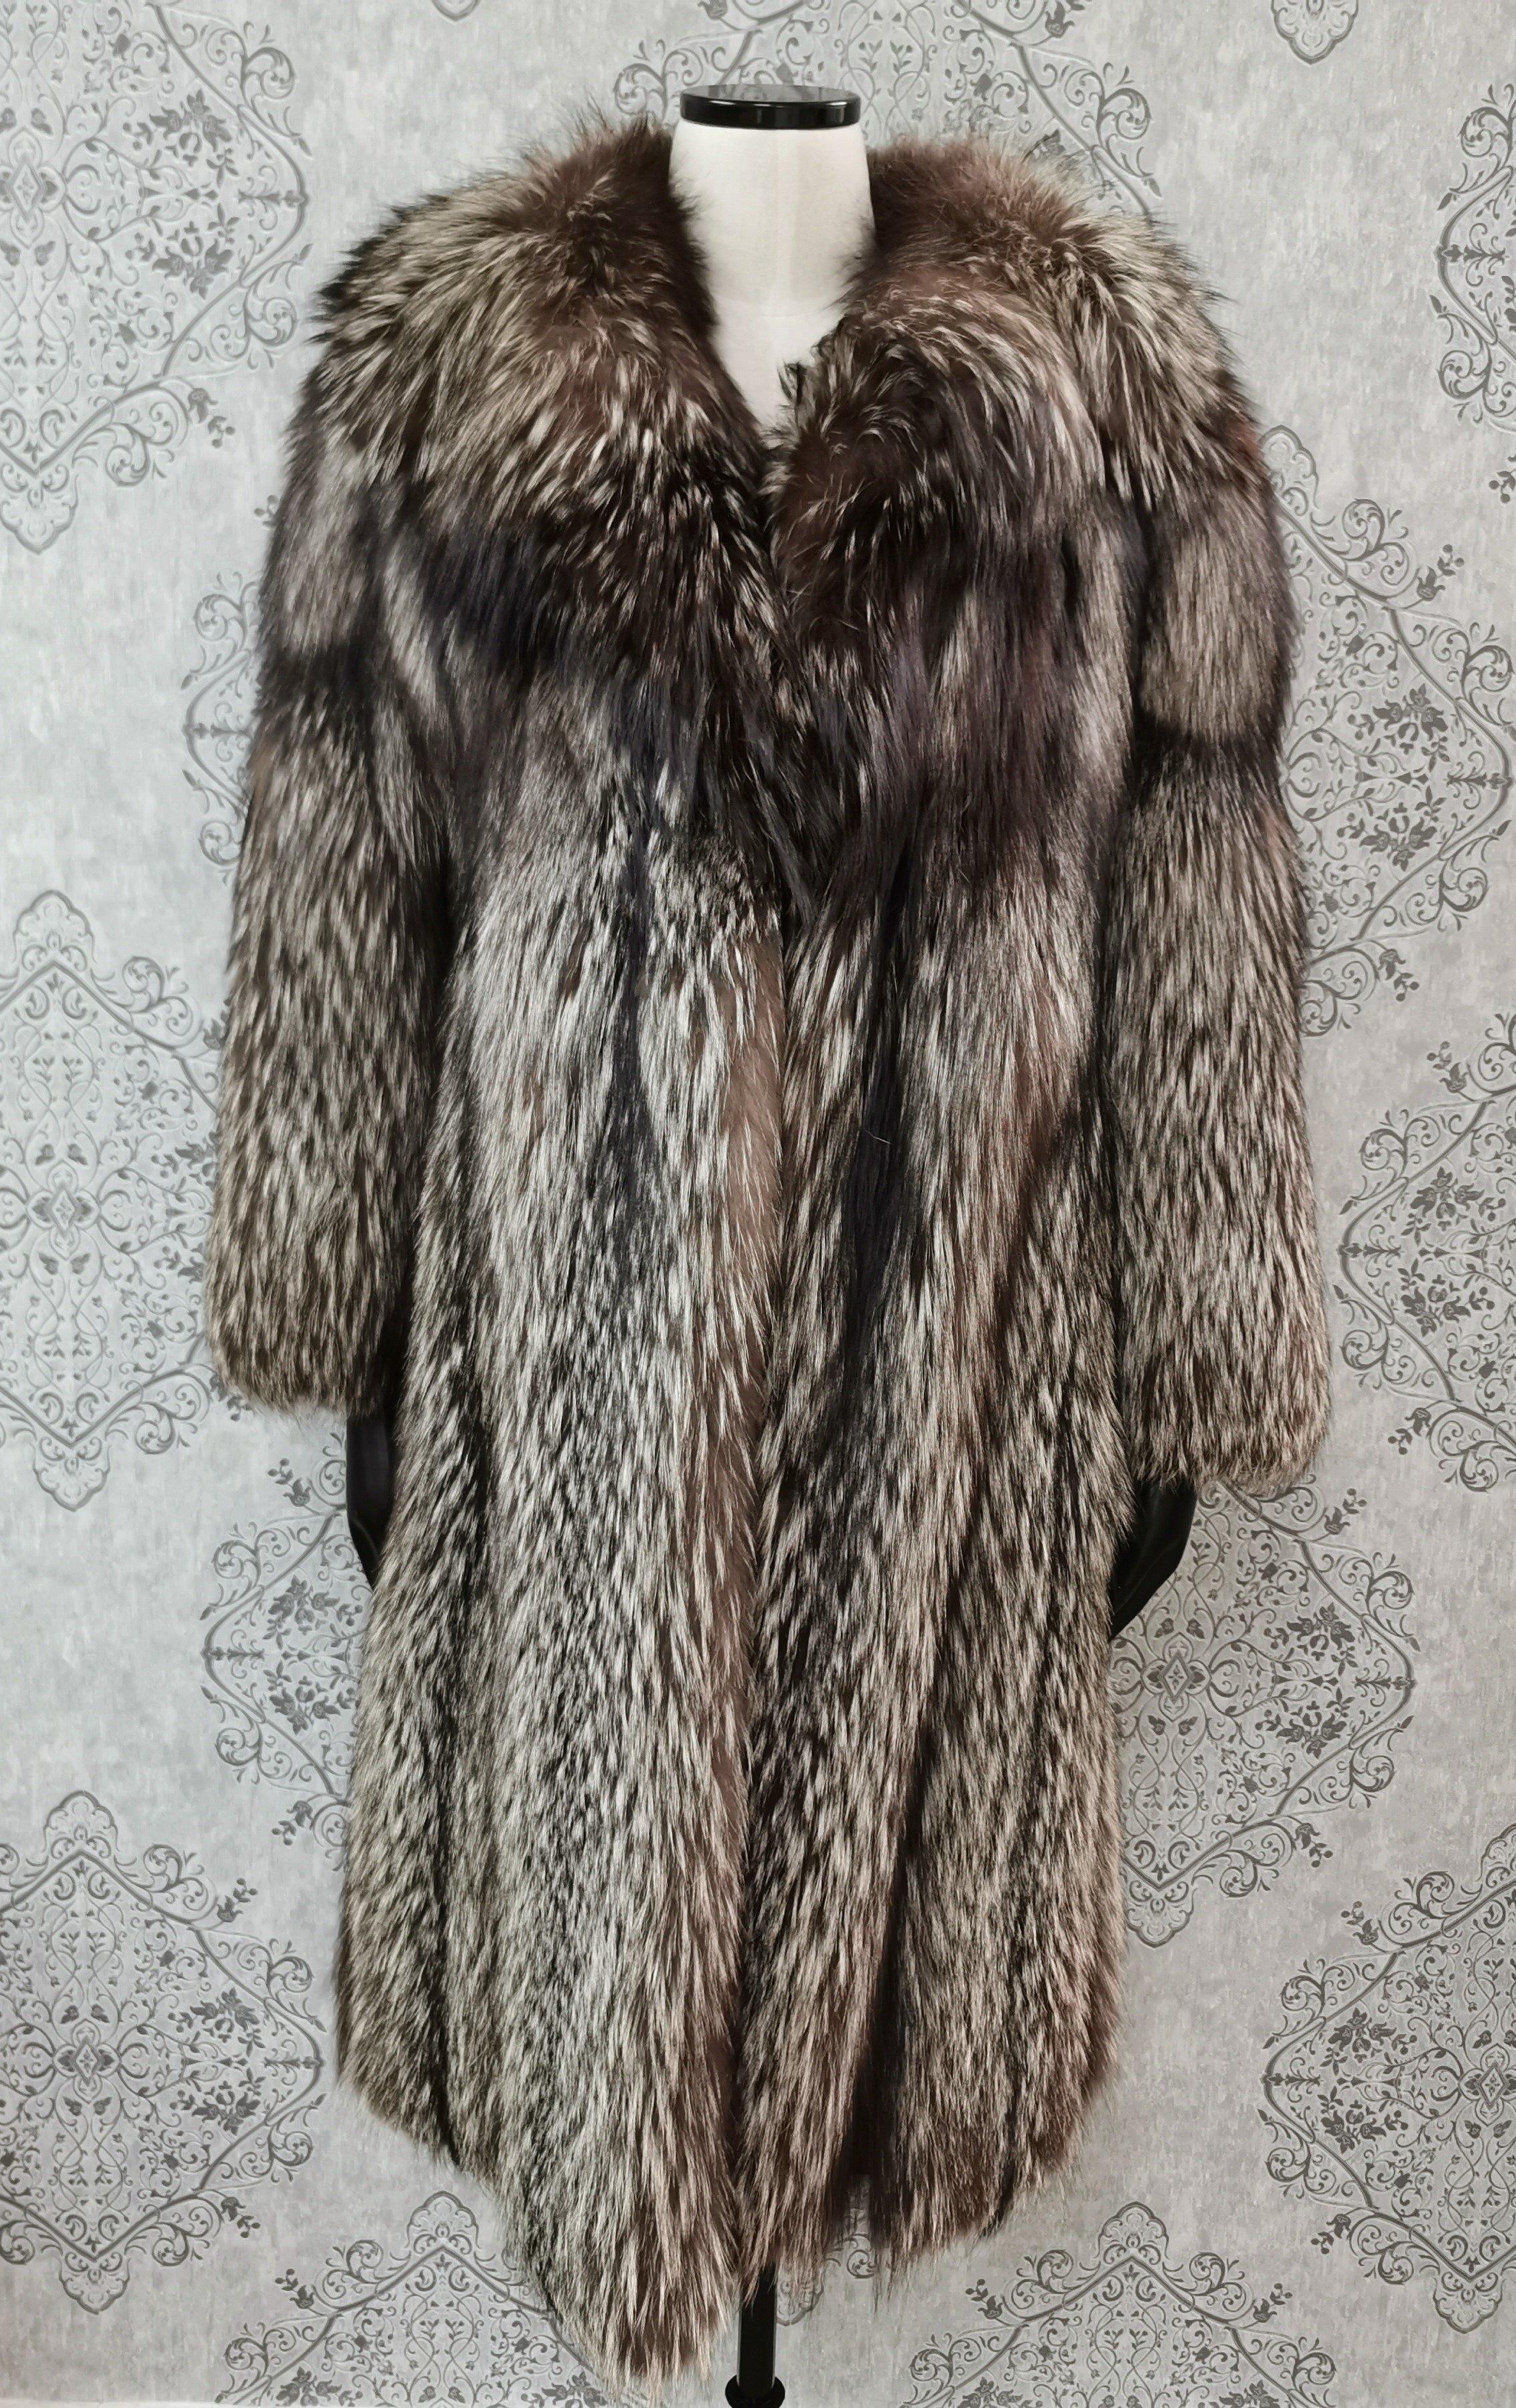 PRODUCT DESCRIPTION:

Brand new stylish Silver fox fur mid-length coat 

Condition: Like New

Closure: Hooks & Eyes

Color: Black, silver and gray

Material: Silver Fox

Garment type: Mid-length Coat

Sleeves: Straight

Pockets: Two side